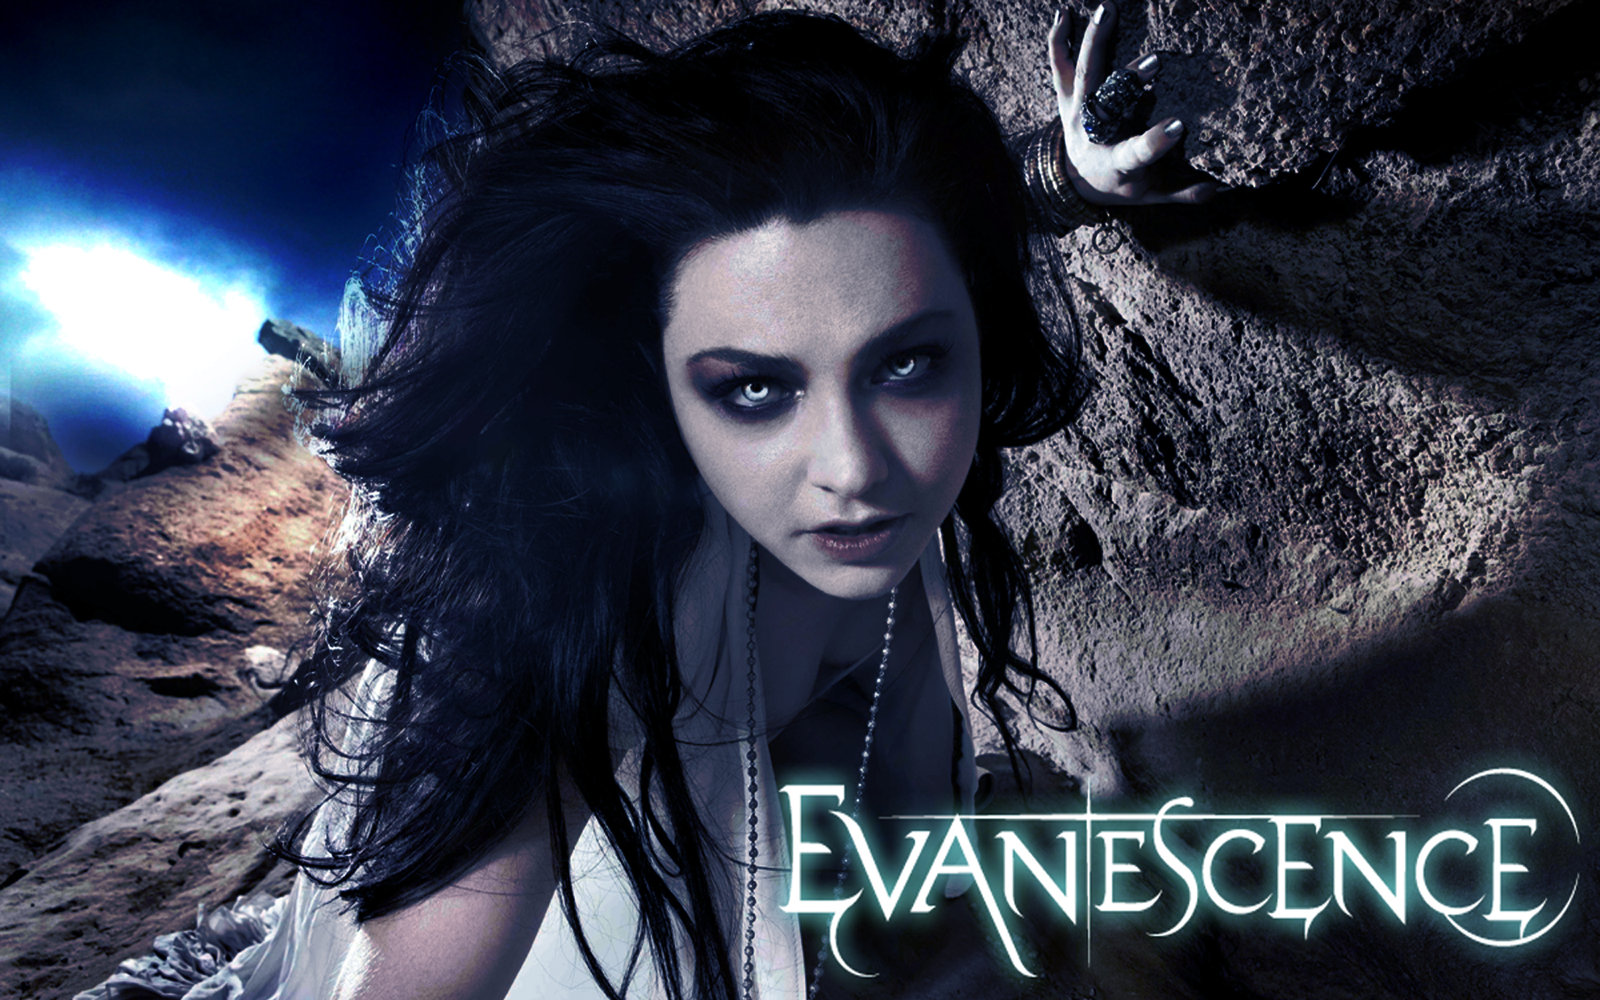 Evanescence Amy Lee By Colongaston